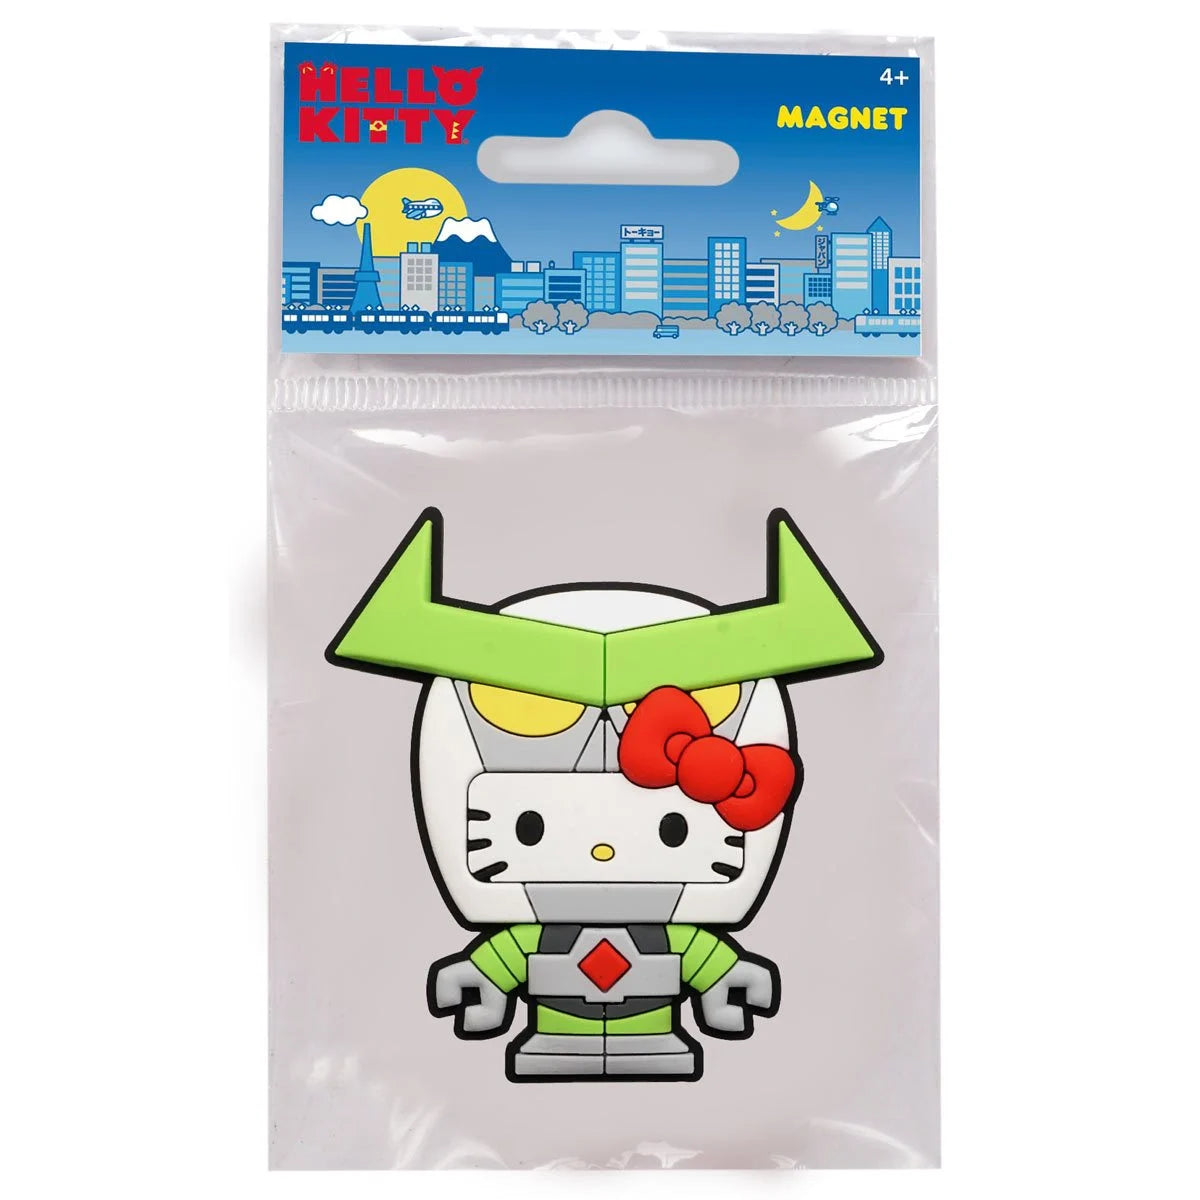 HELLO KITTY SPACE KAIJU SOFT TOUCH MAGNET